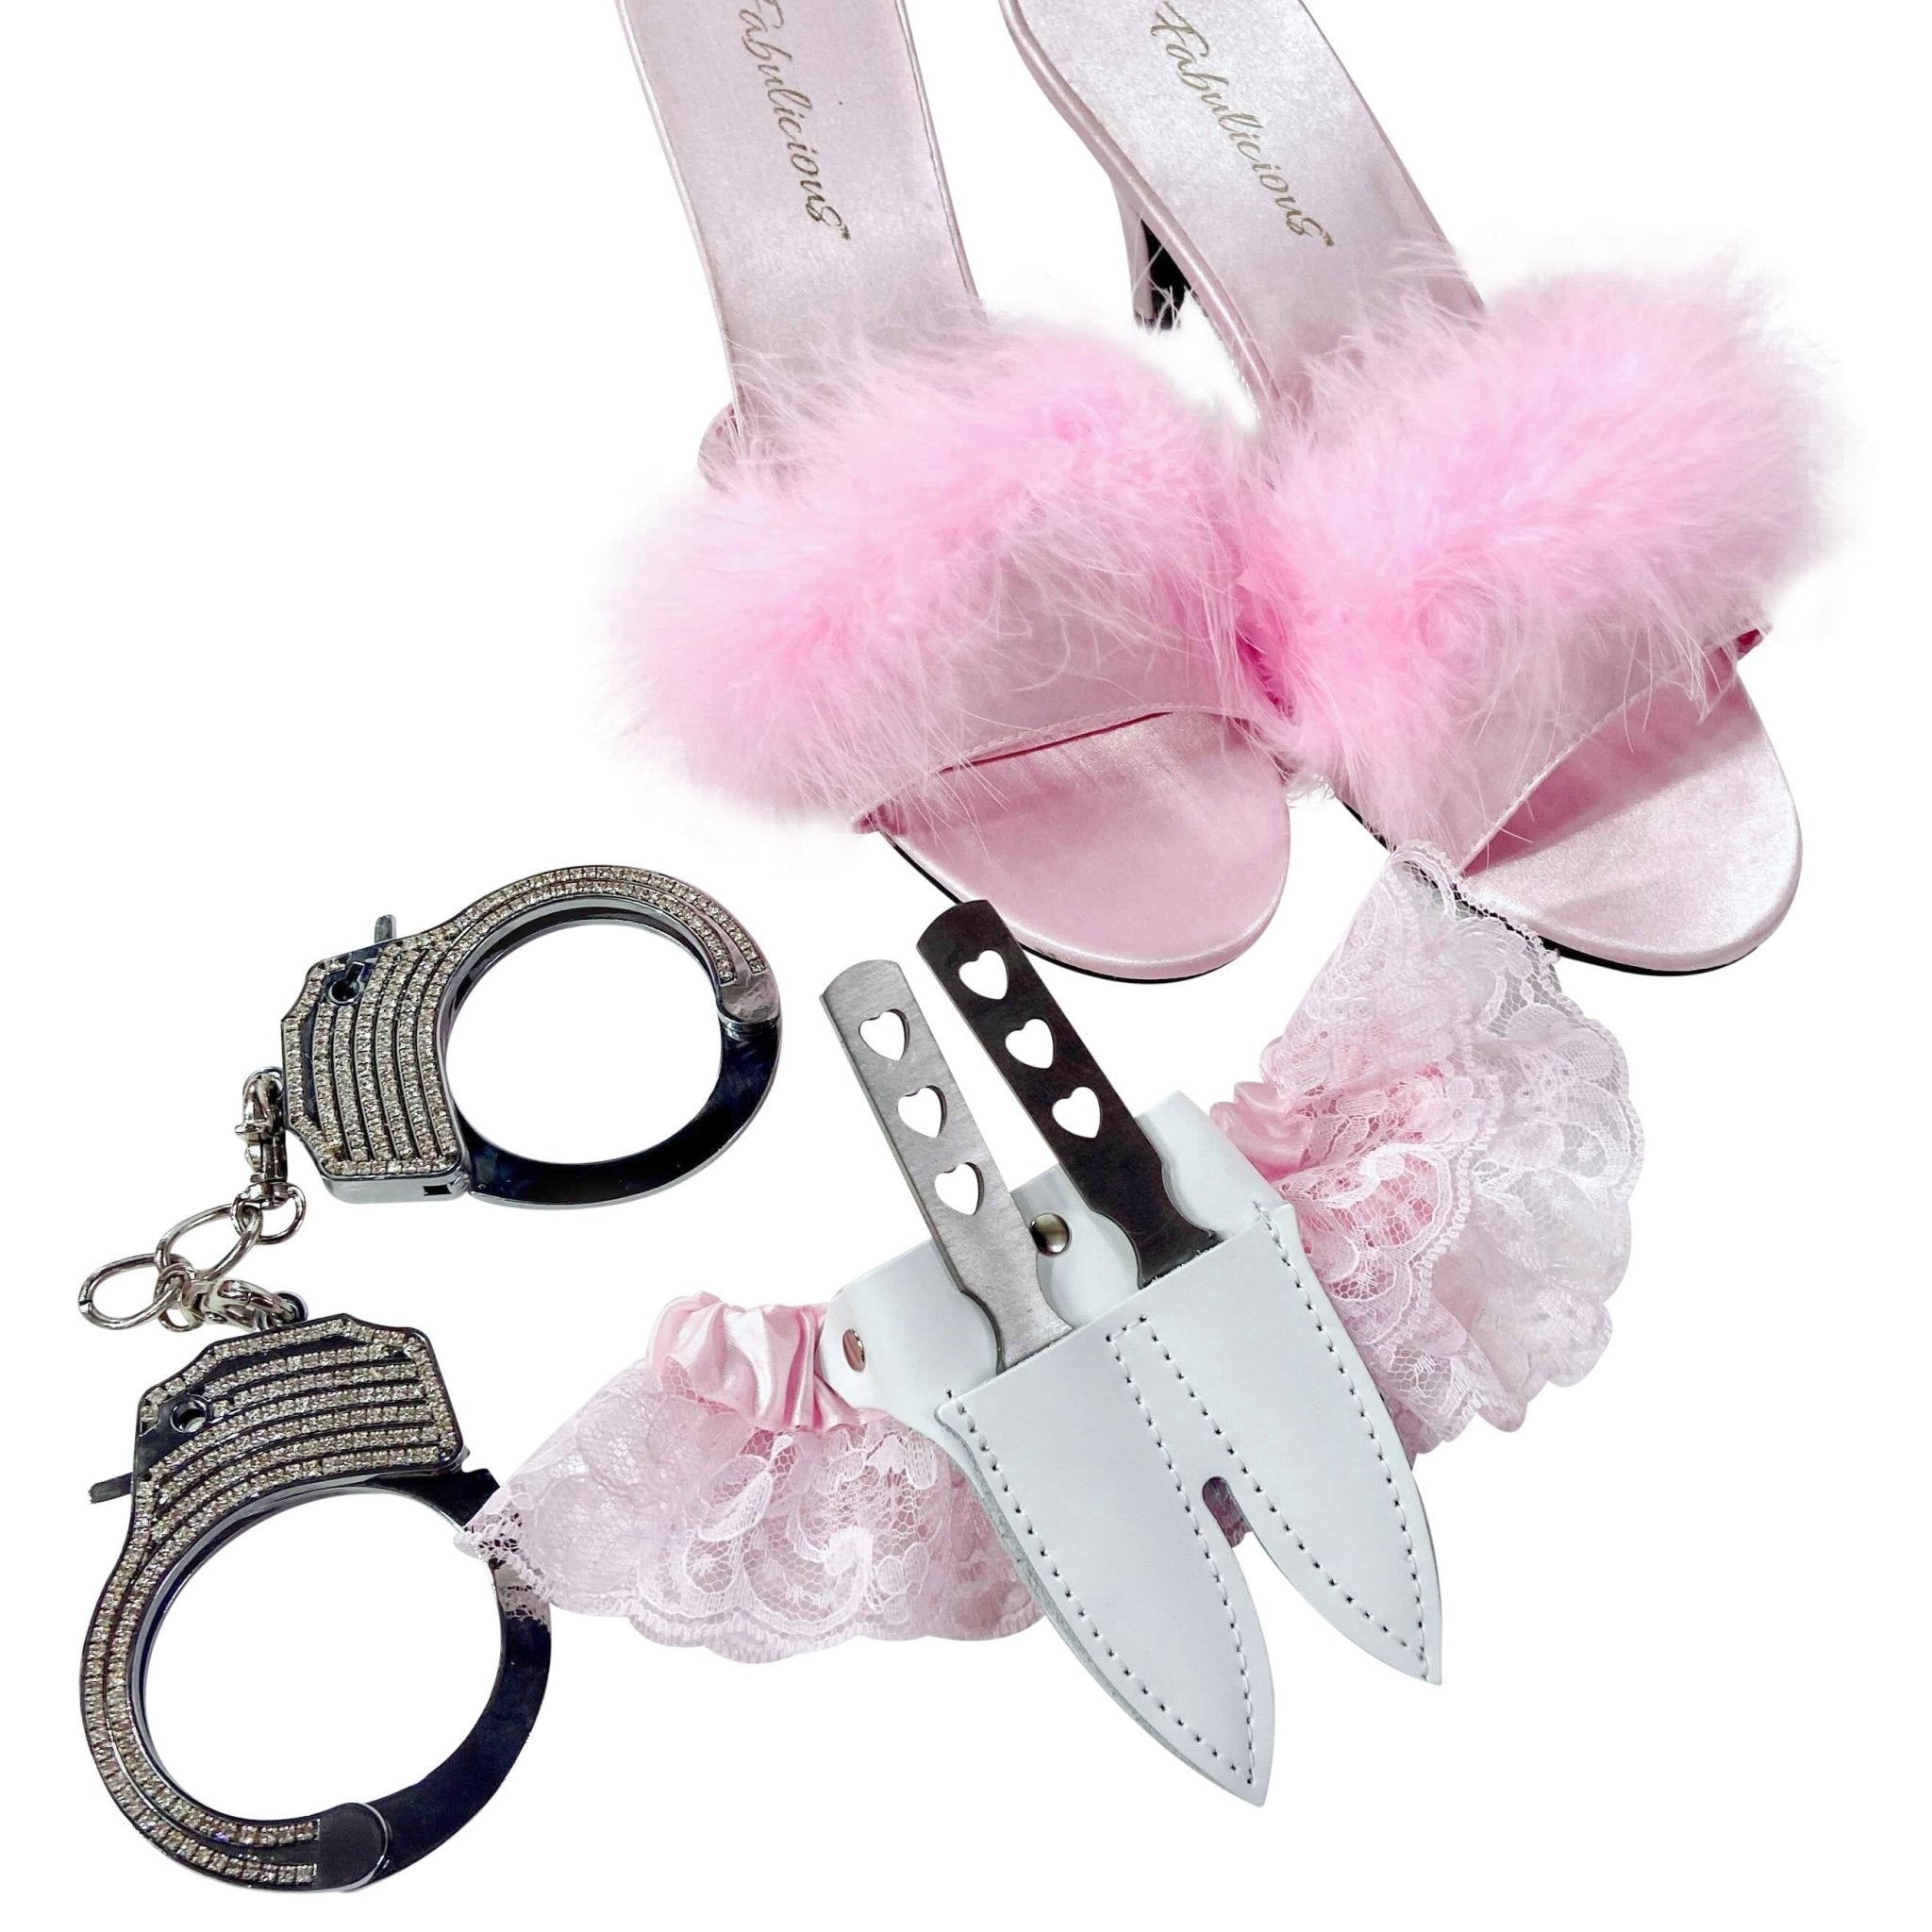 Leather & Lace Garter Knife - Pink & White Plus Size - Blades For Babes - Throwers - 3